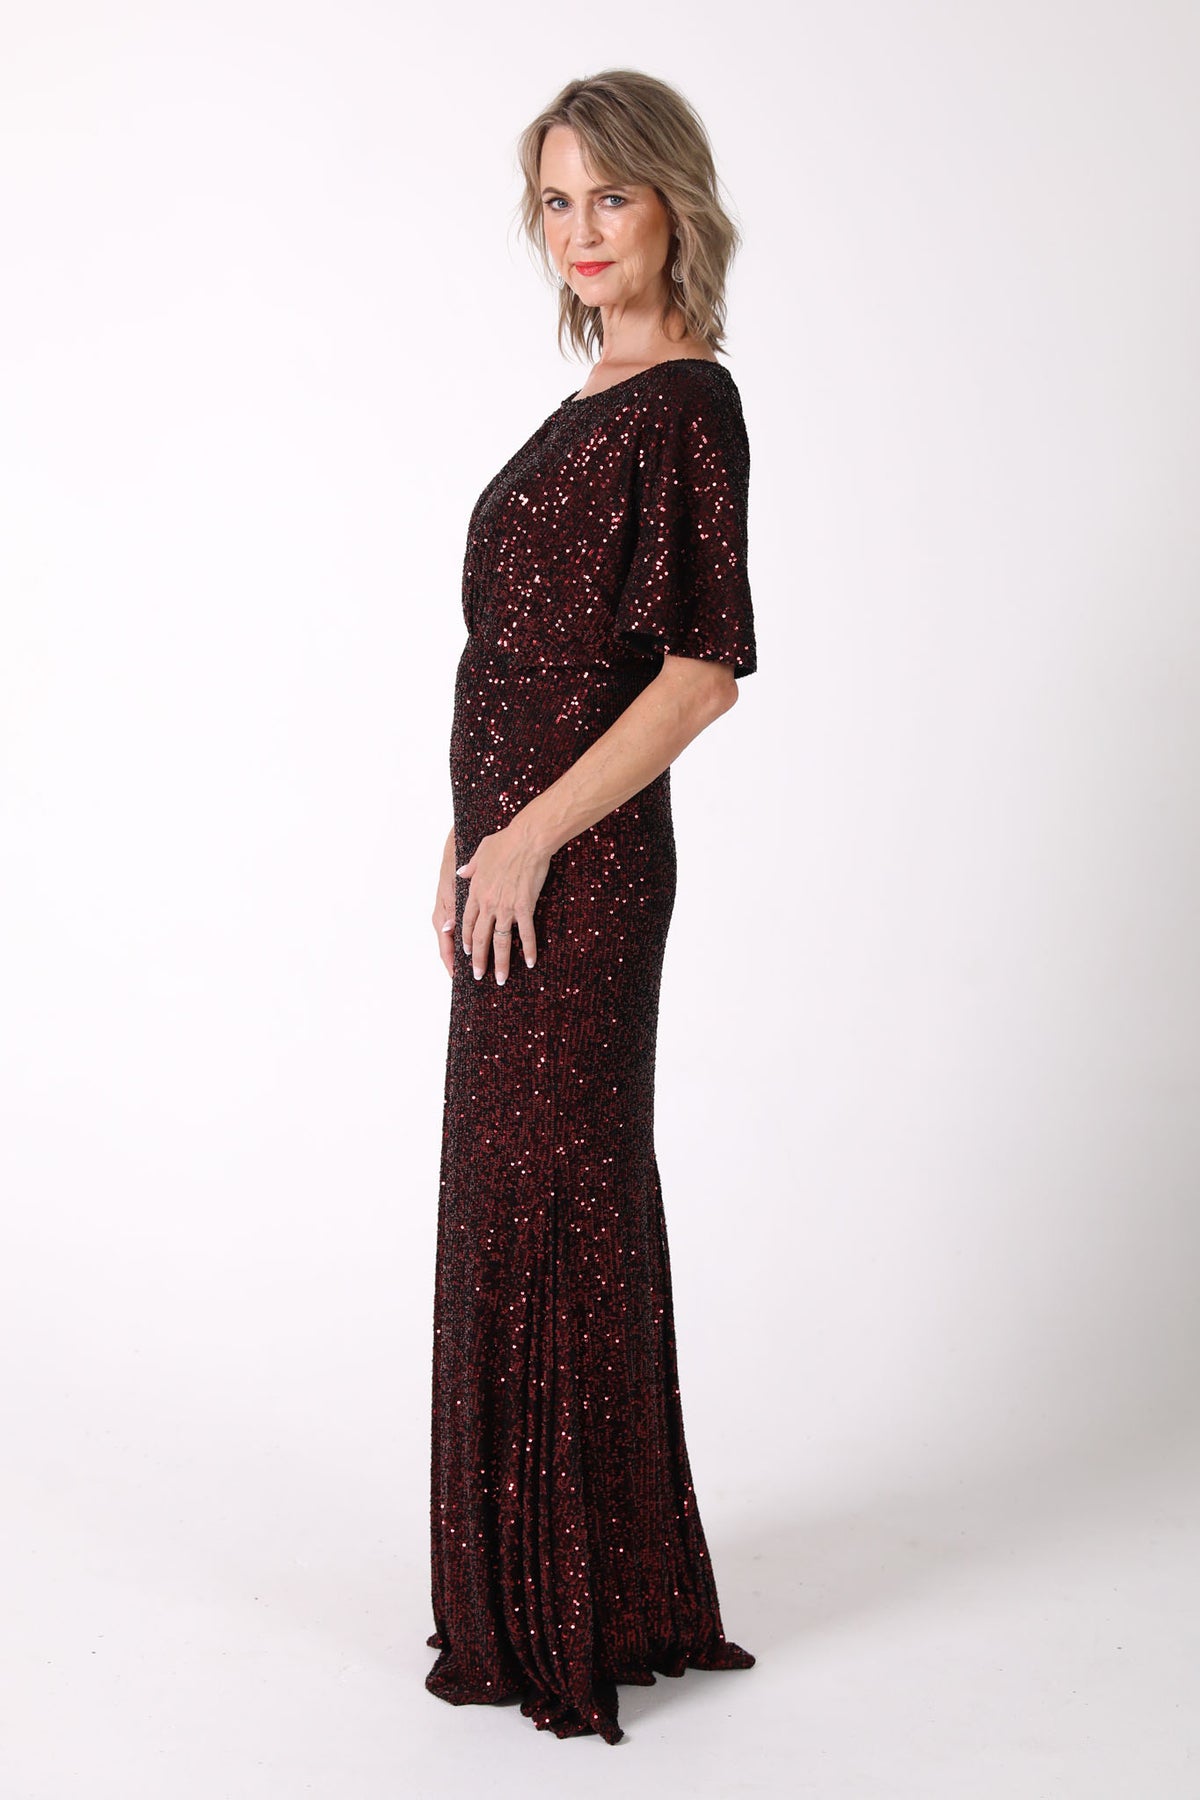 Side Image of Mother of The Bride Sequin Fitted Full Length Maxi Dress with Round Neck and Butterfly Sleeves in Burgundy Deep Red